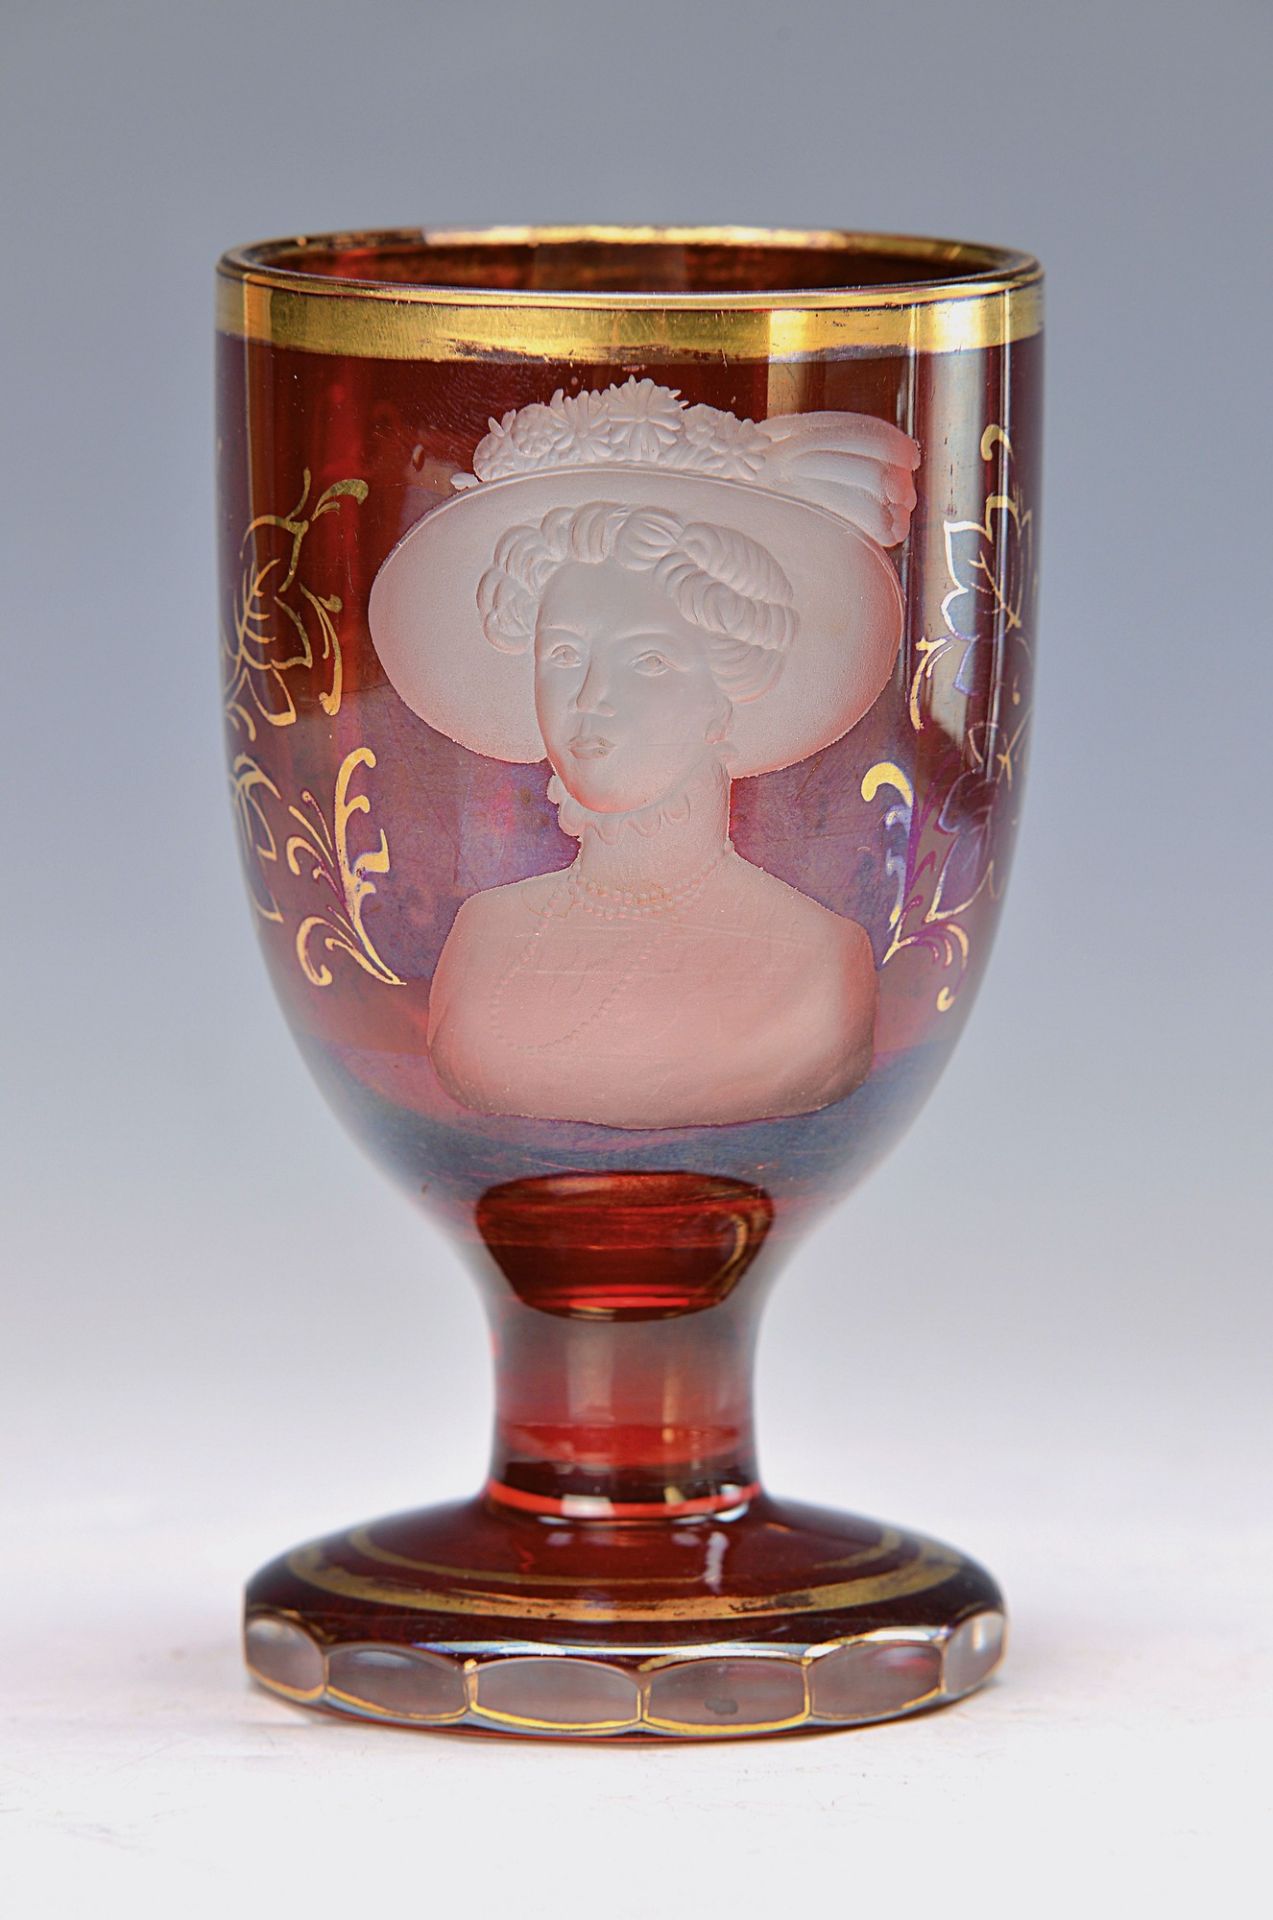 decoration glass, German, around 1915, representation of Viktoria Luise of Prussia on her visit in